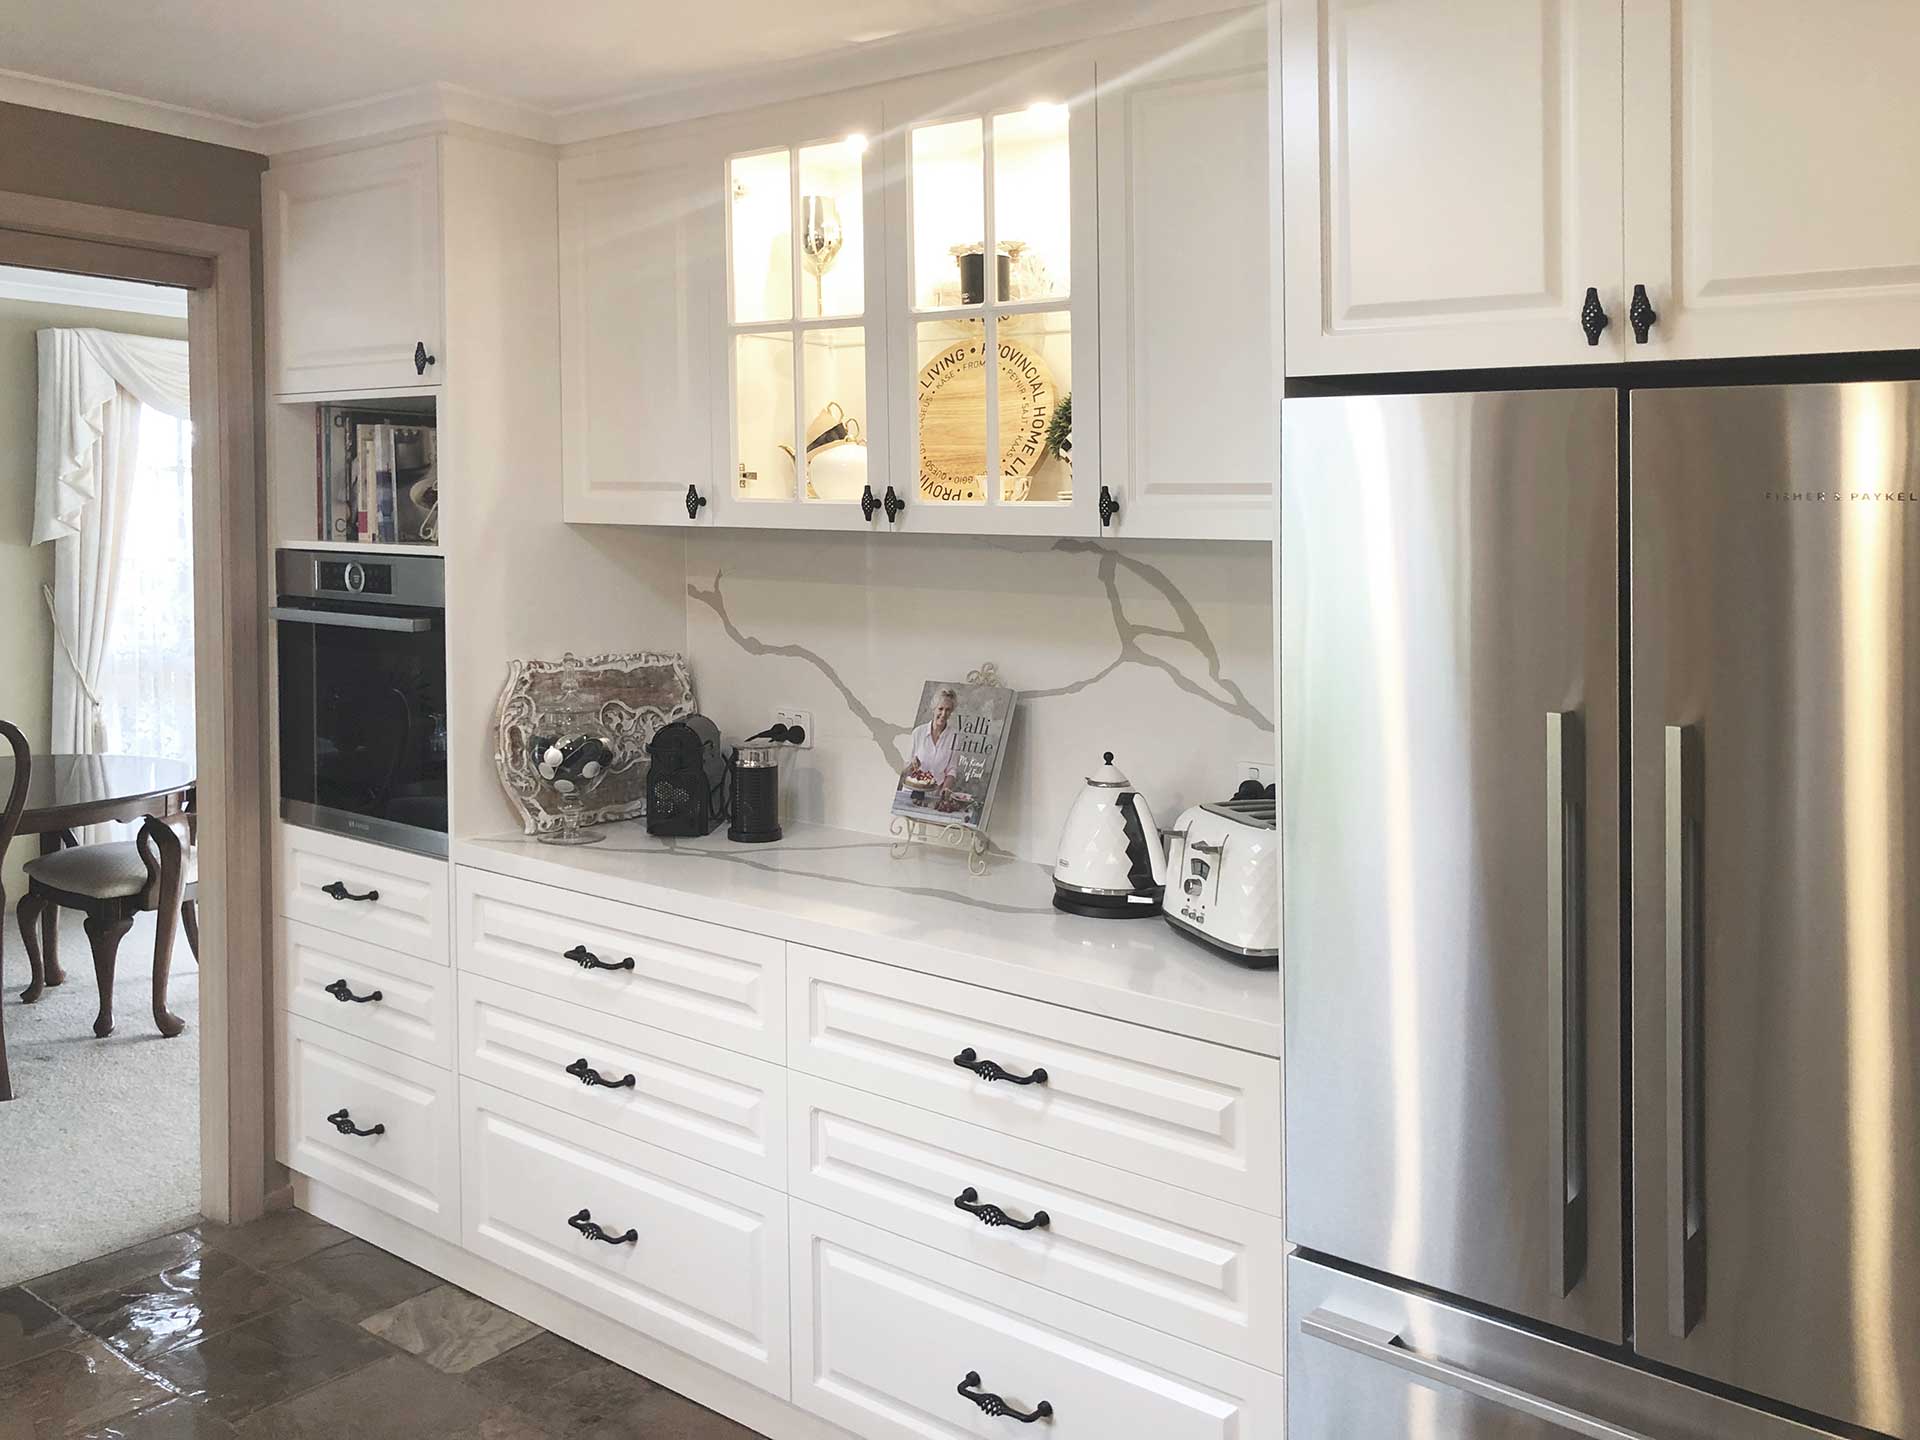 Functional And Stylish Cabinetry Design For Modern Kitchen Glen Iris